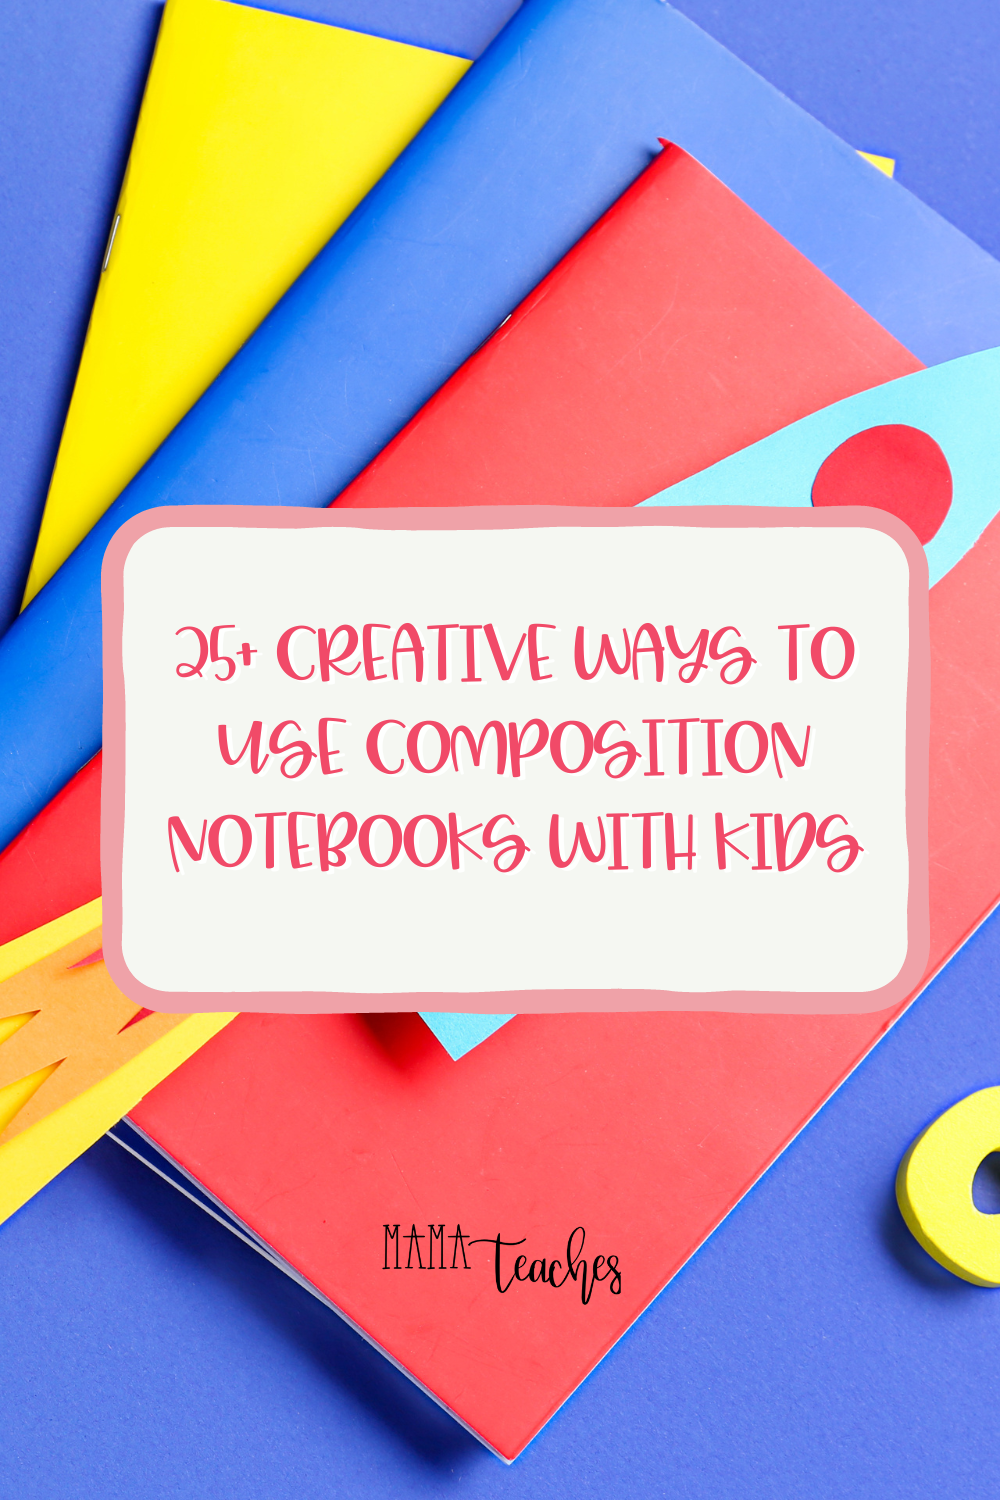 25+ Creative Ways to Use Composition Notebooks  with Kids